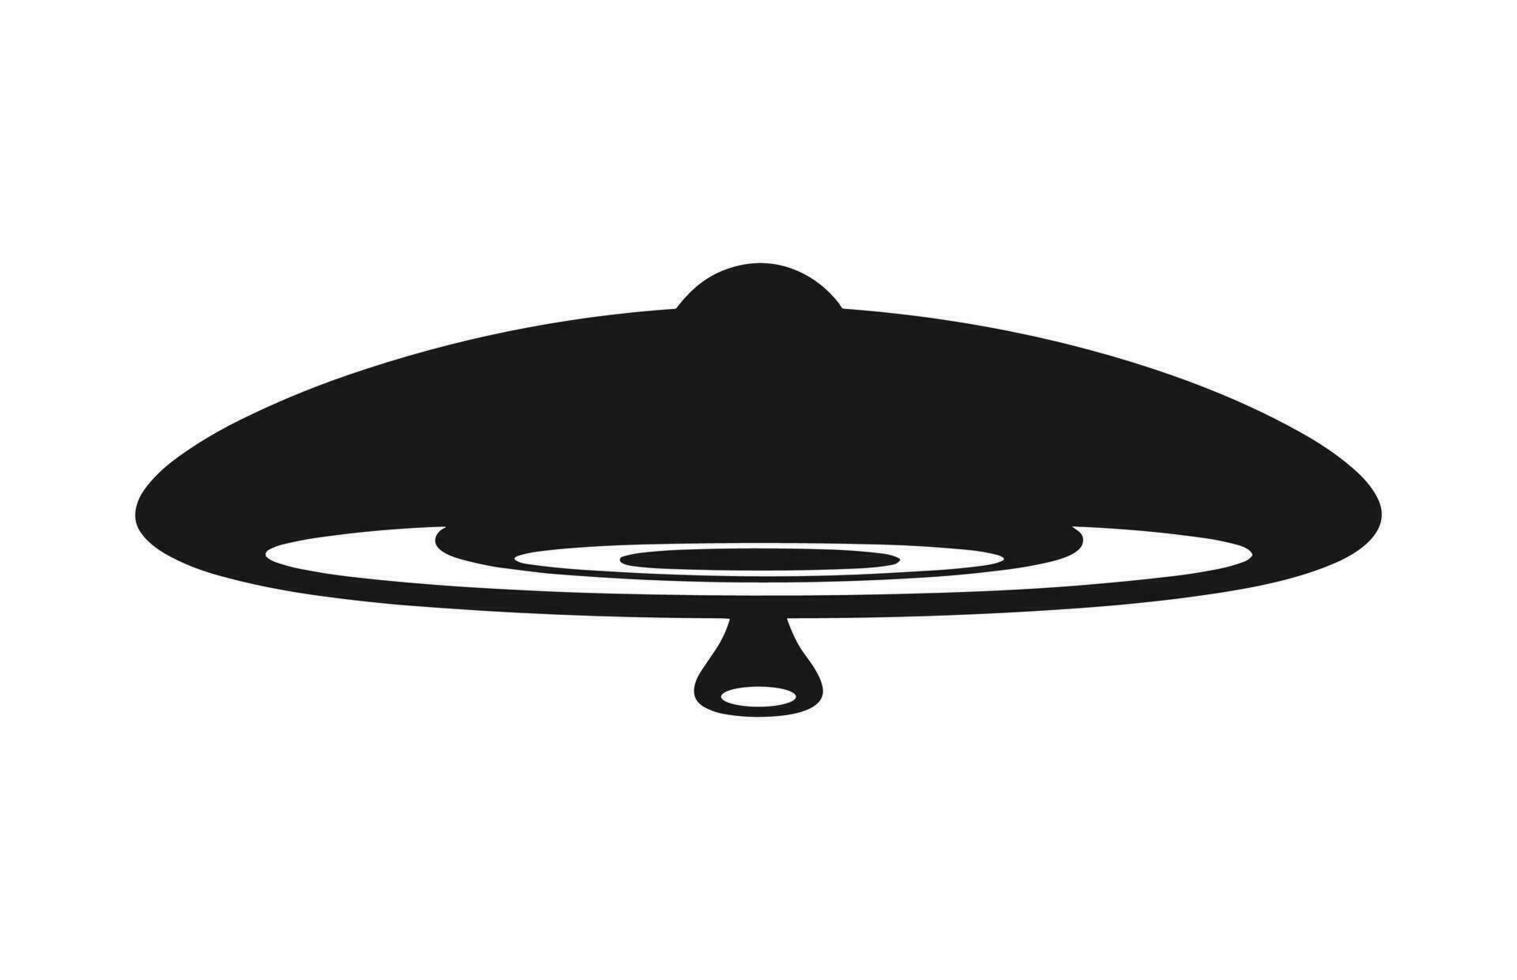 A Space UFO silhouette vector